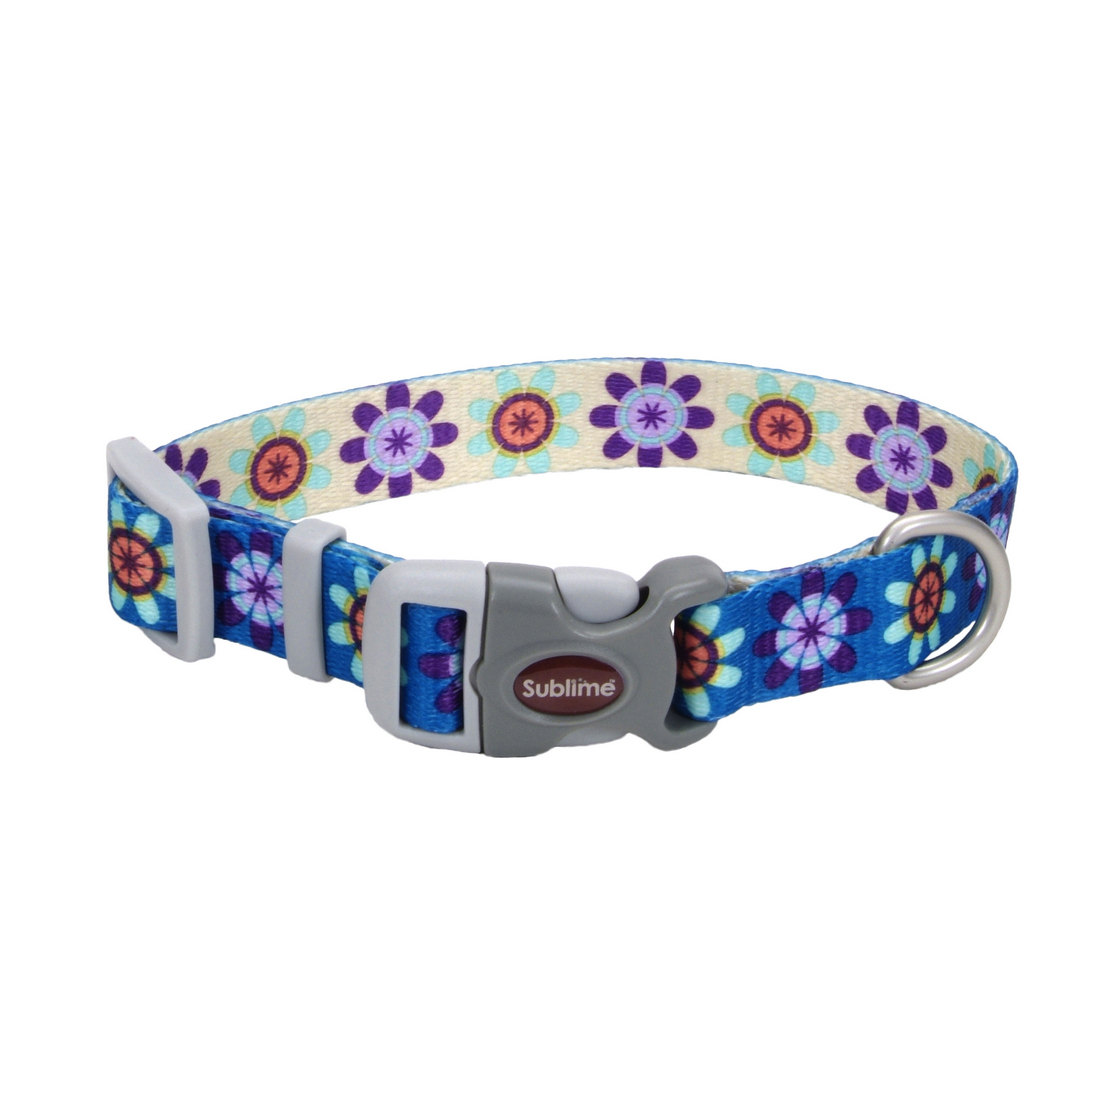 Coastal 3 4 and Sublime Dog Collar Flower Purple and Yellow Small Medium